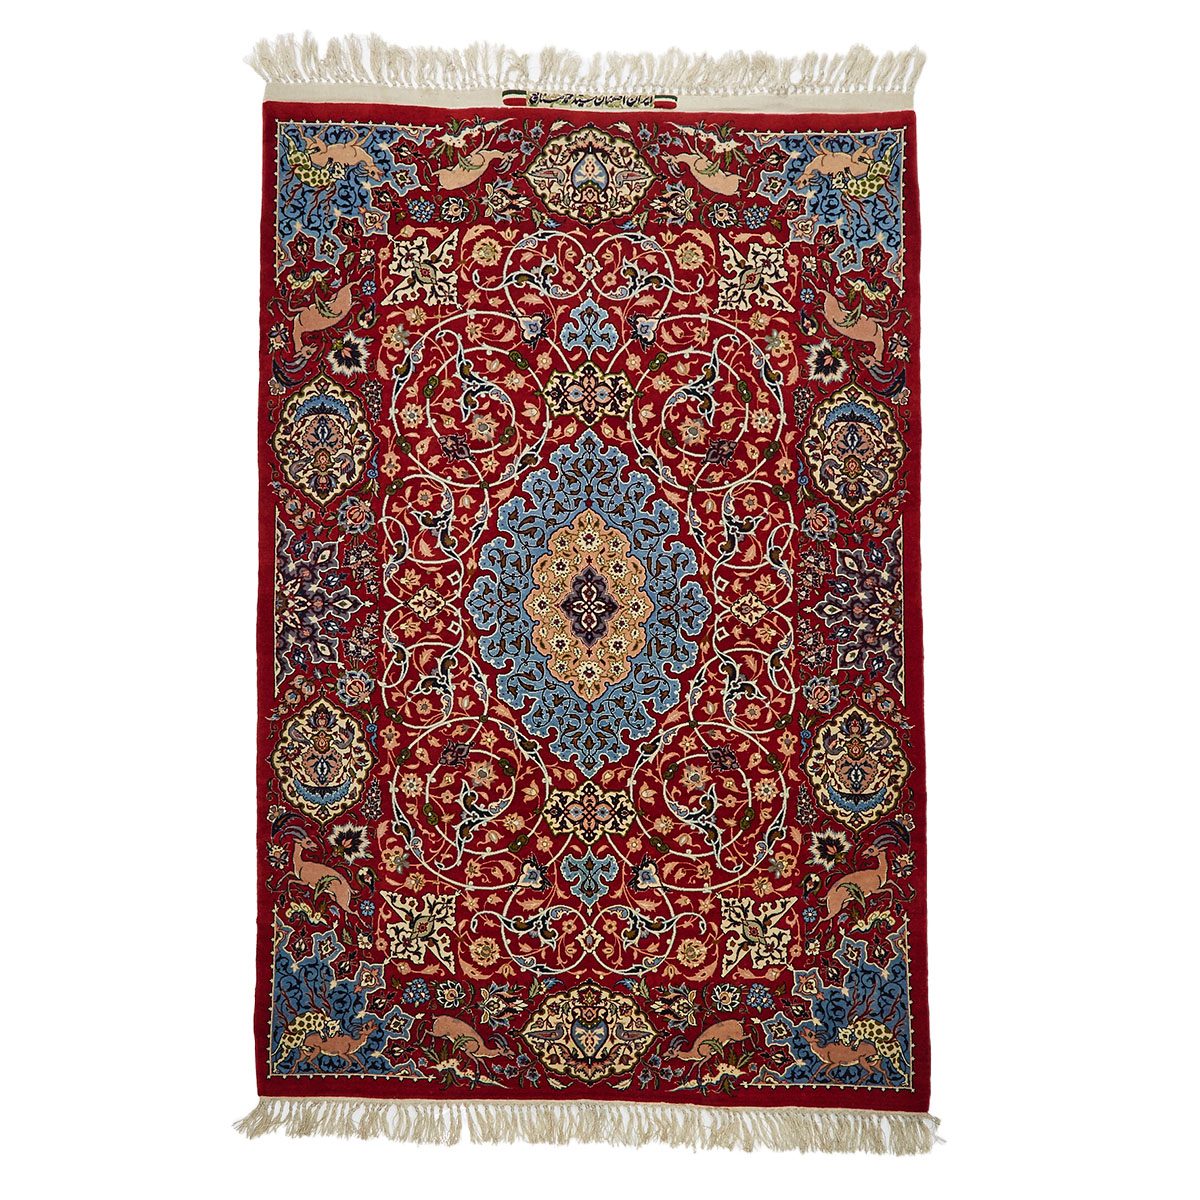 FIne Ispahan Rug, signed and on a silk foundation, Persian, mid to late 20th century